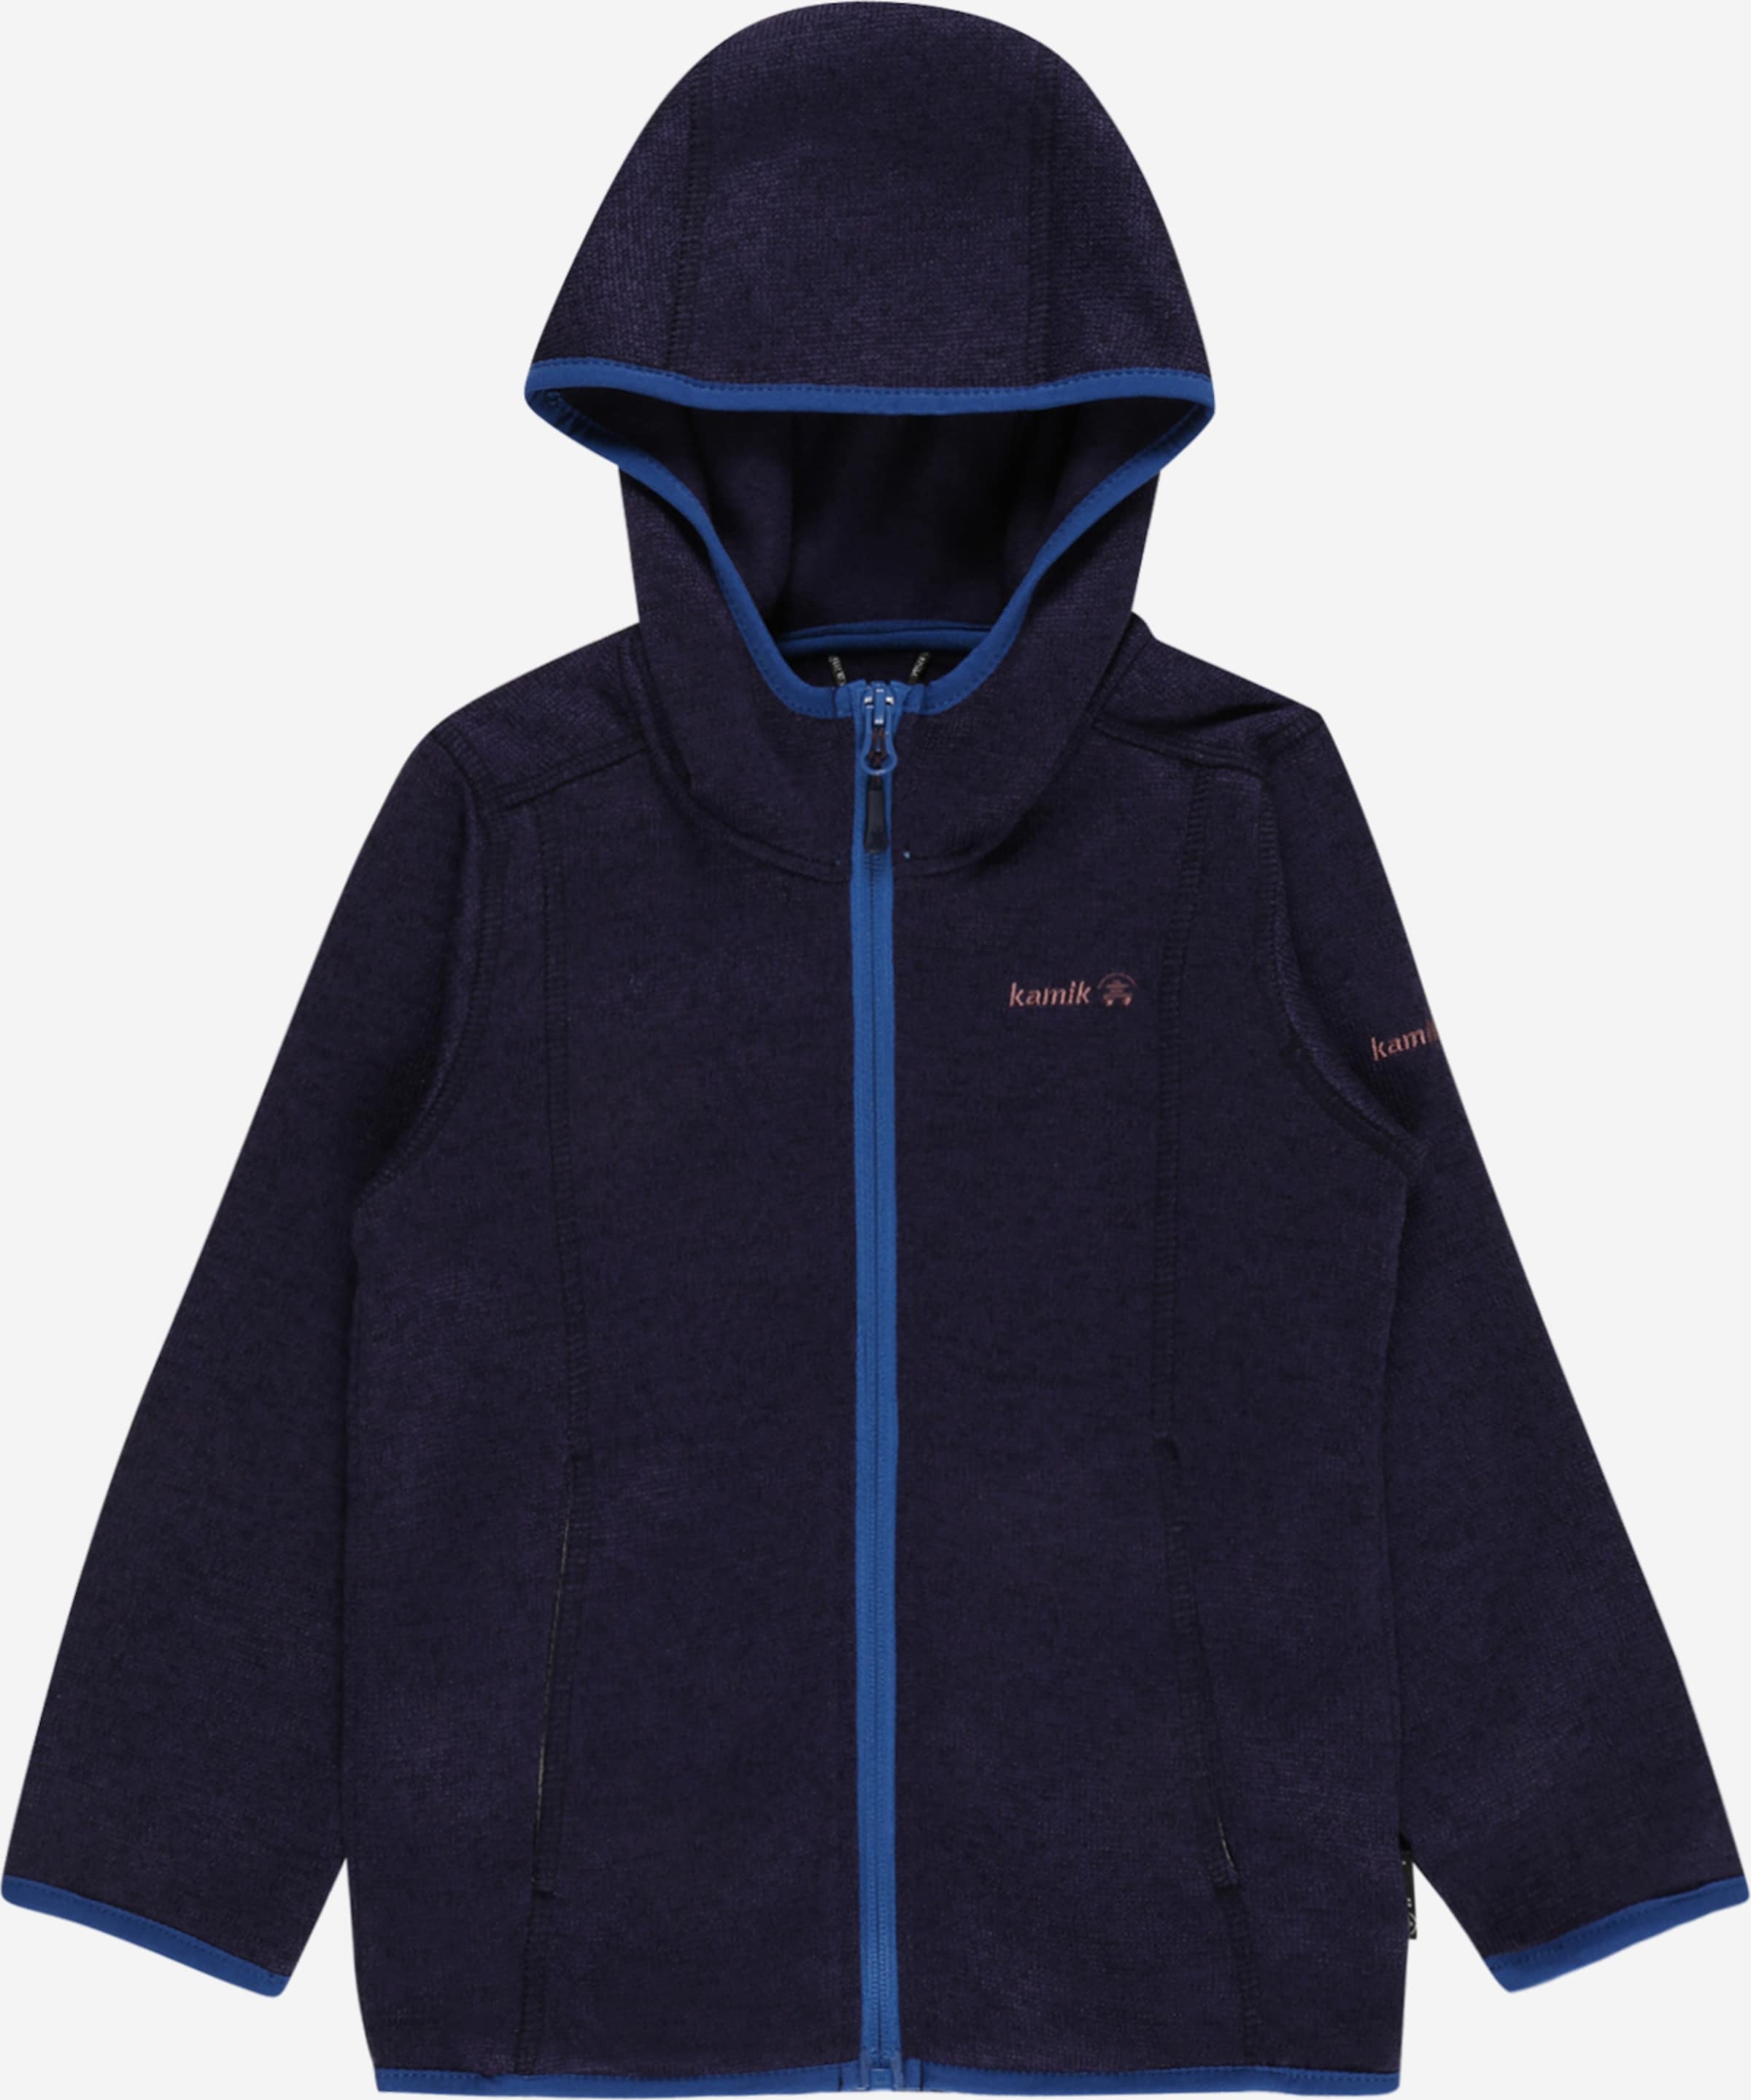 Kamik Strickjacke 'River' in Navy | ABOUT YOU